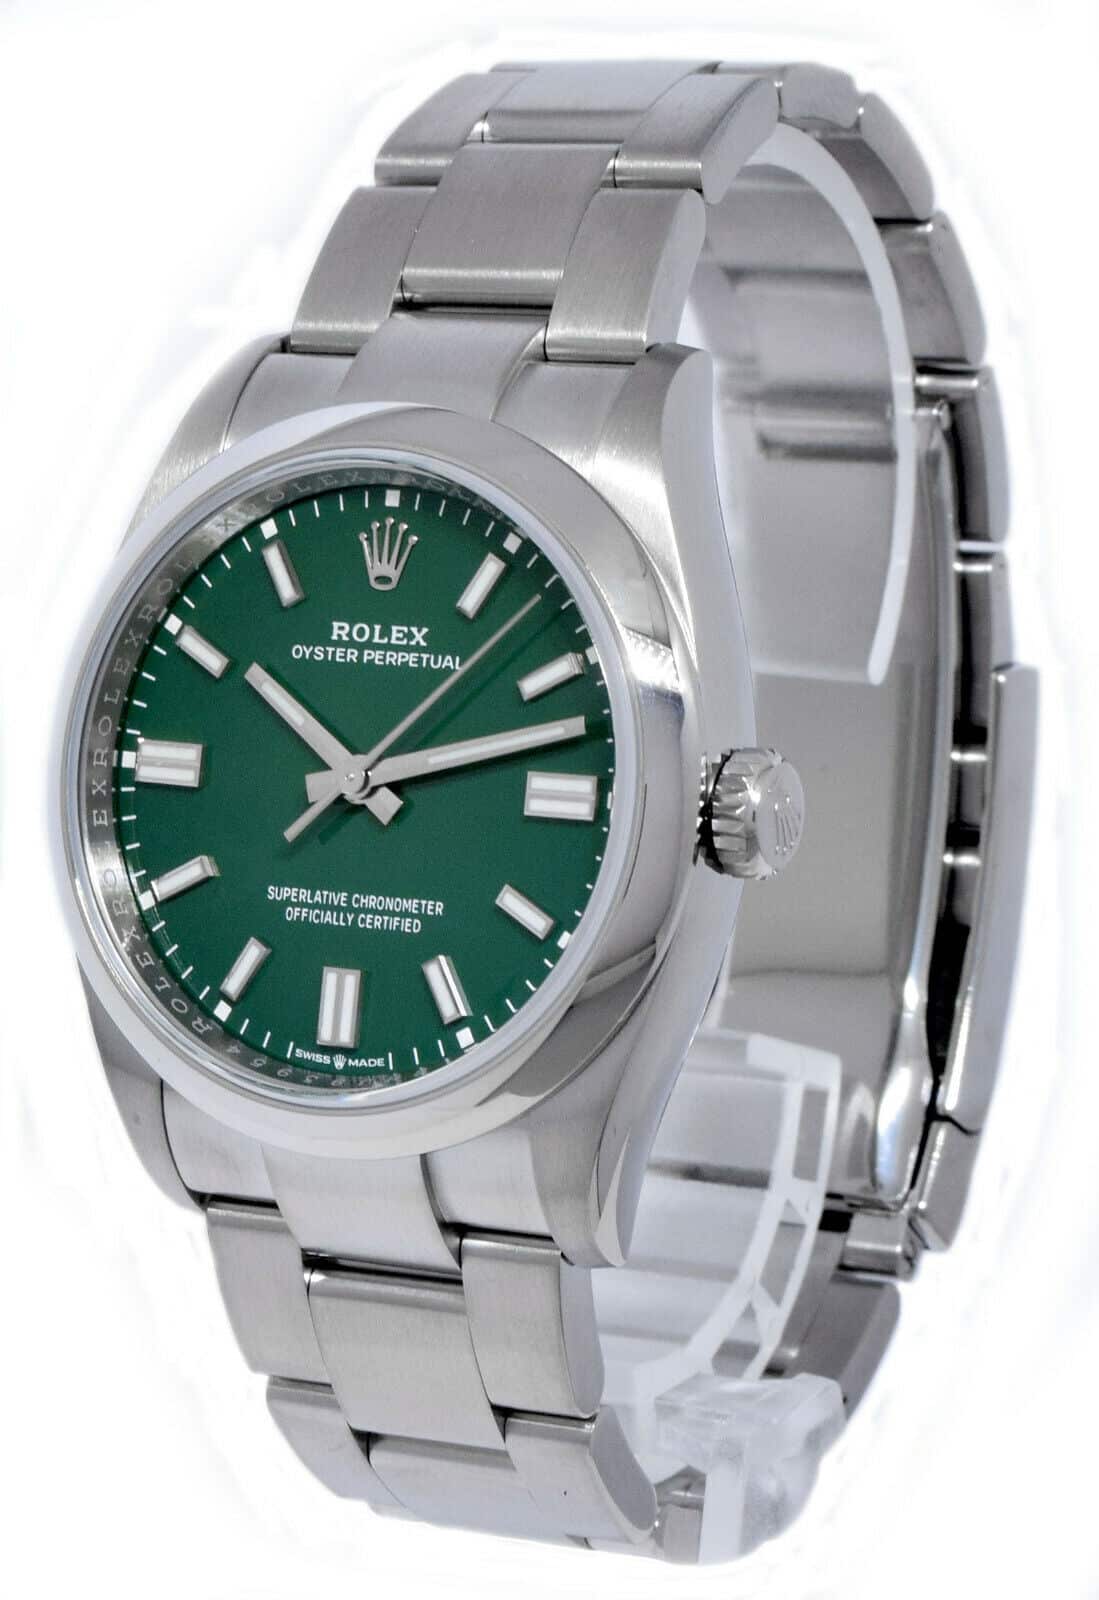 NOS Rolex Oyster Perpetual 36 Steel Green Dial Watch B/P '21 126000